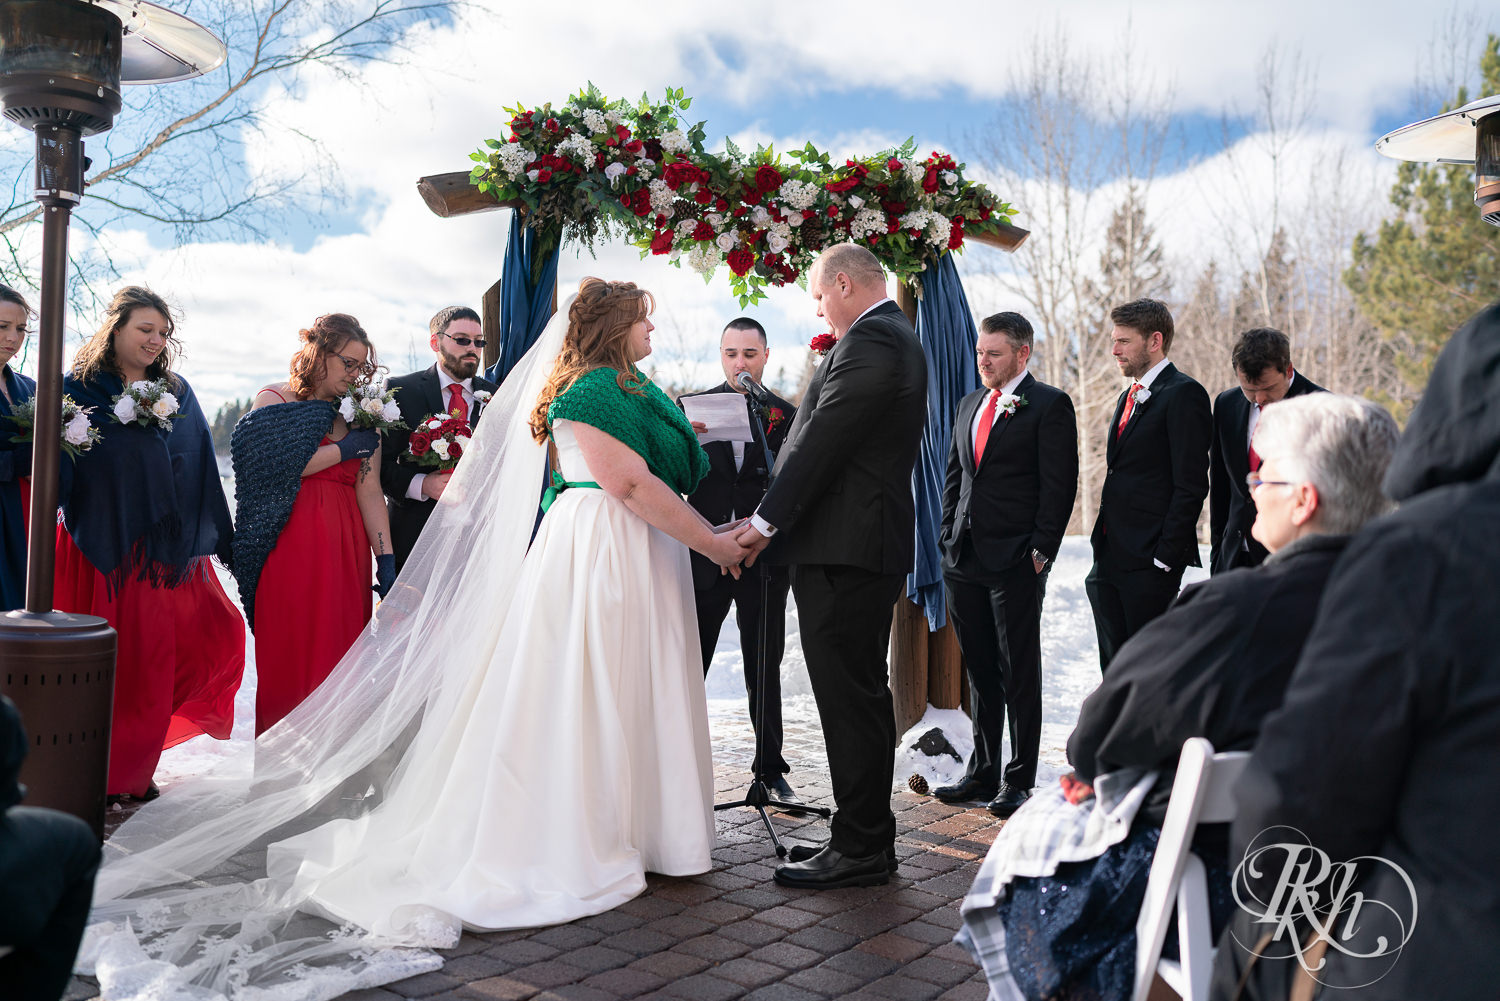 Outdoor winter wedding ceremony in the snow at Grand Superior Lodge in Two Harbors, Minnesota.